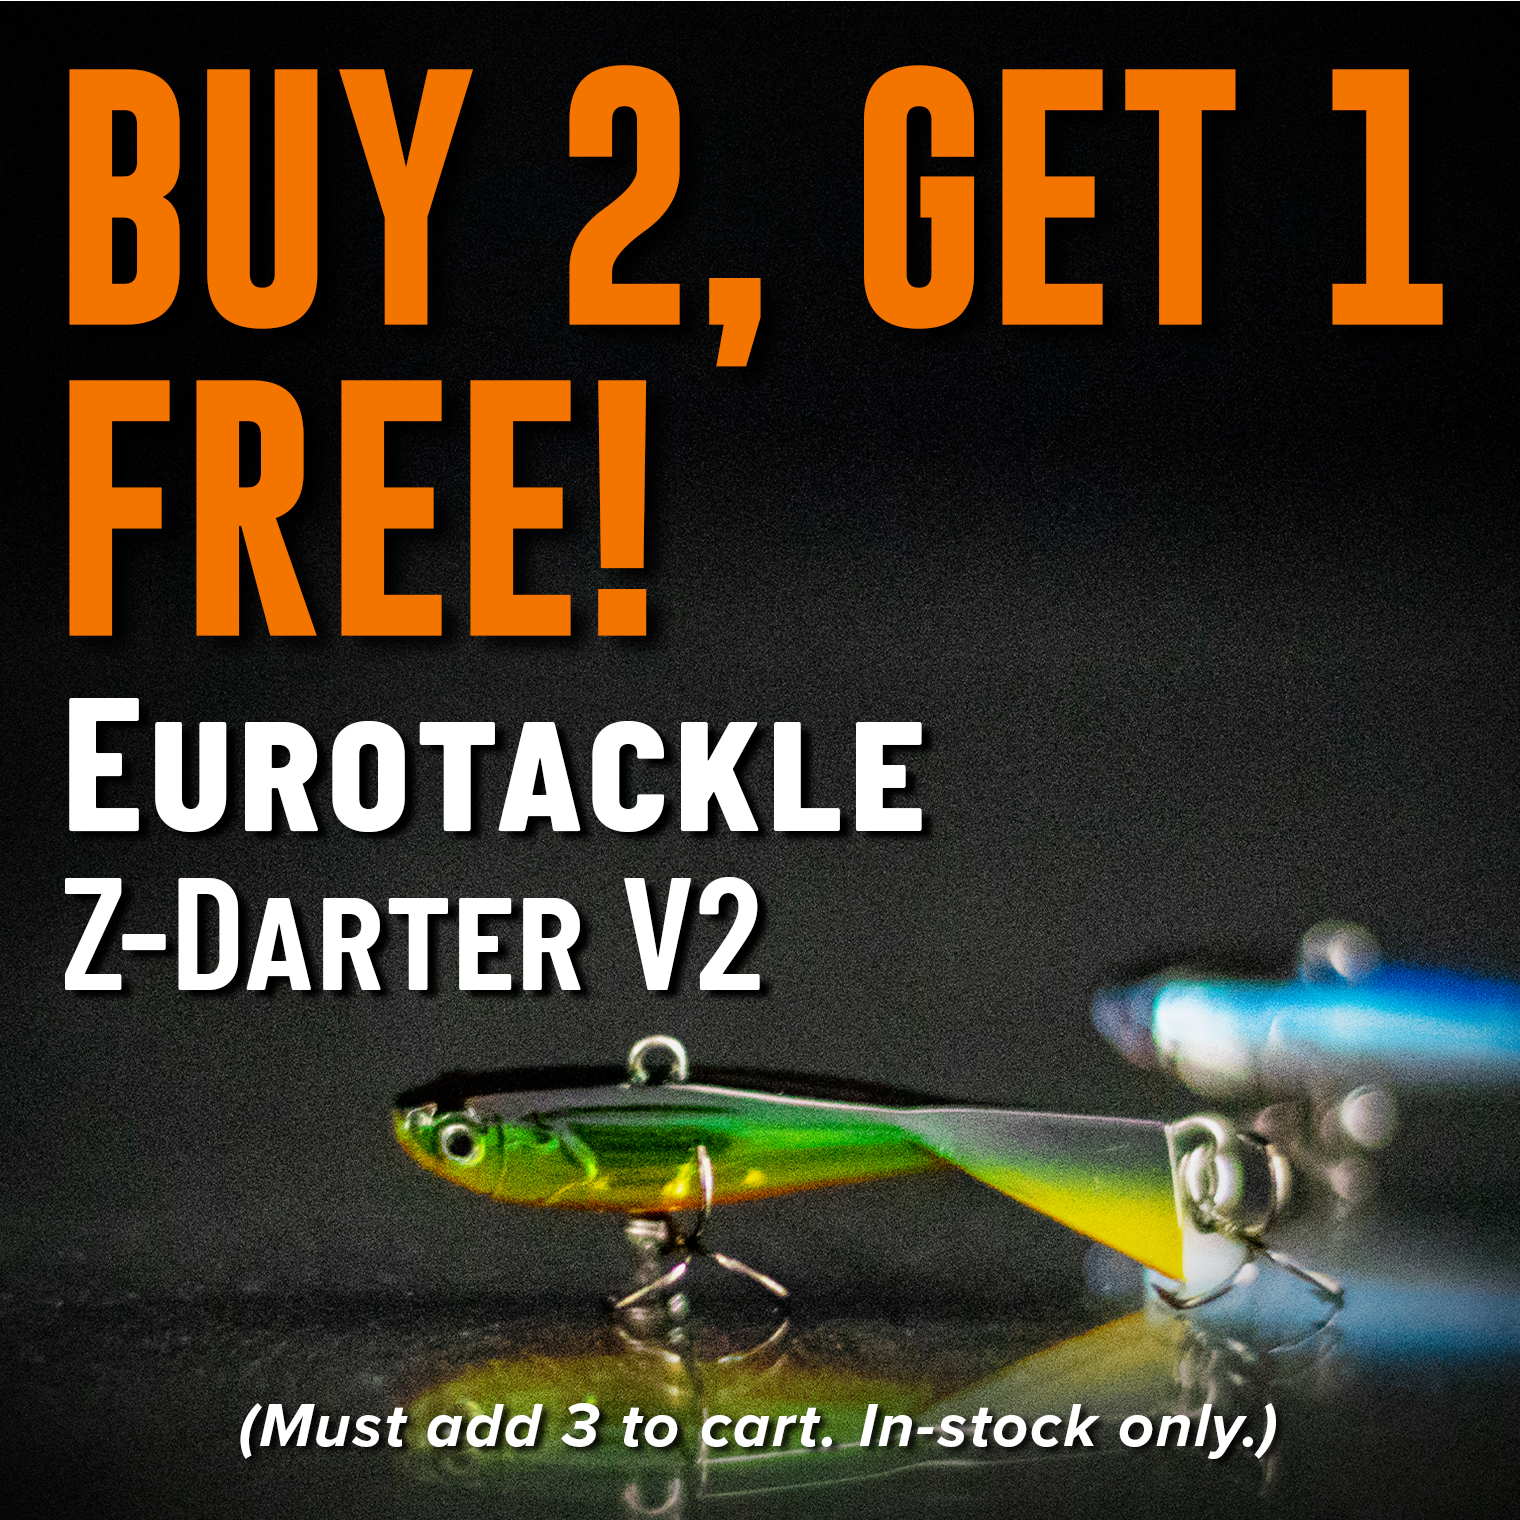 Buy 2, Get 1 Free! Eurotackle Z-Darter V2 (Must add 3 to cart. In-stock only.)